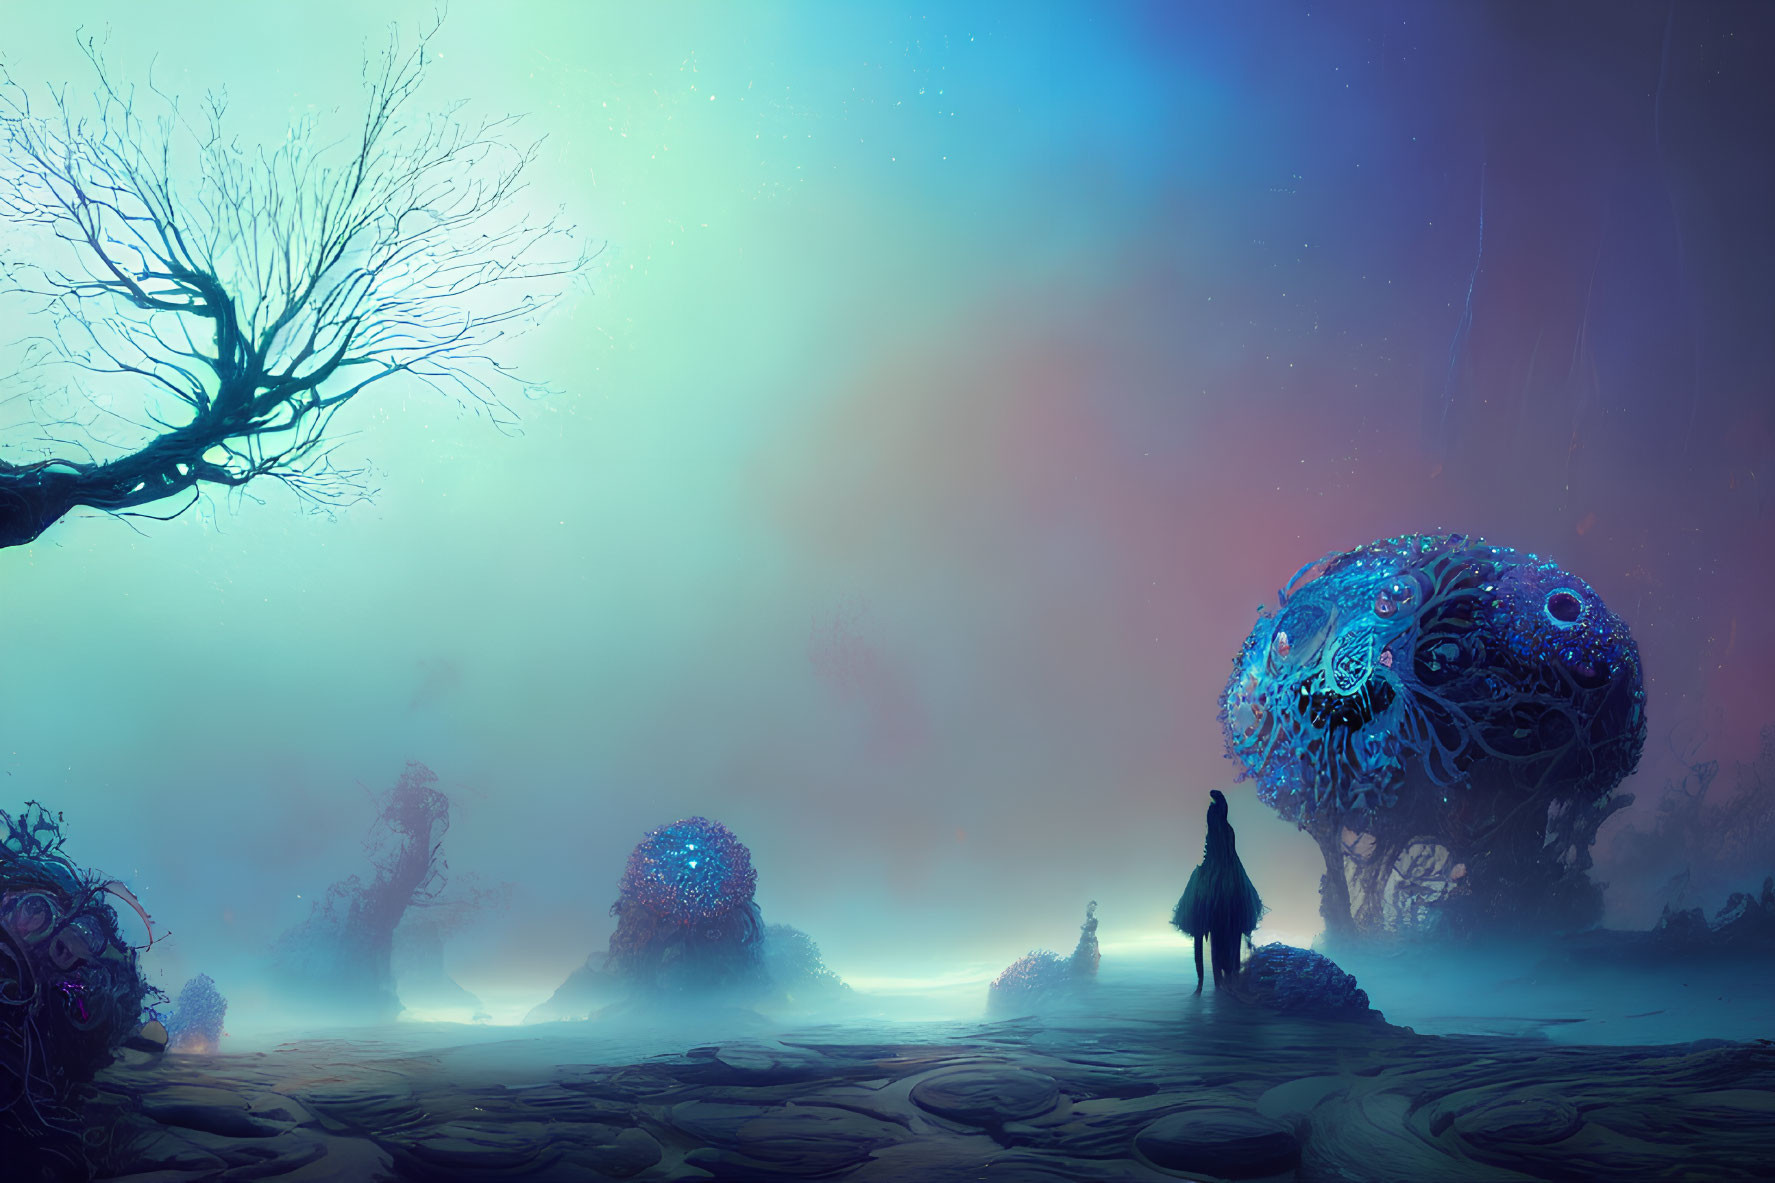 Surreal landscape with mist, vibrant sky, and otherworldly flora.